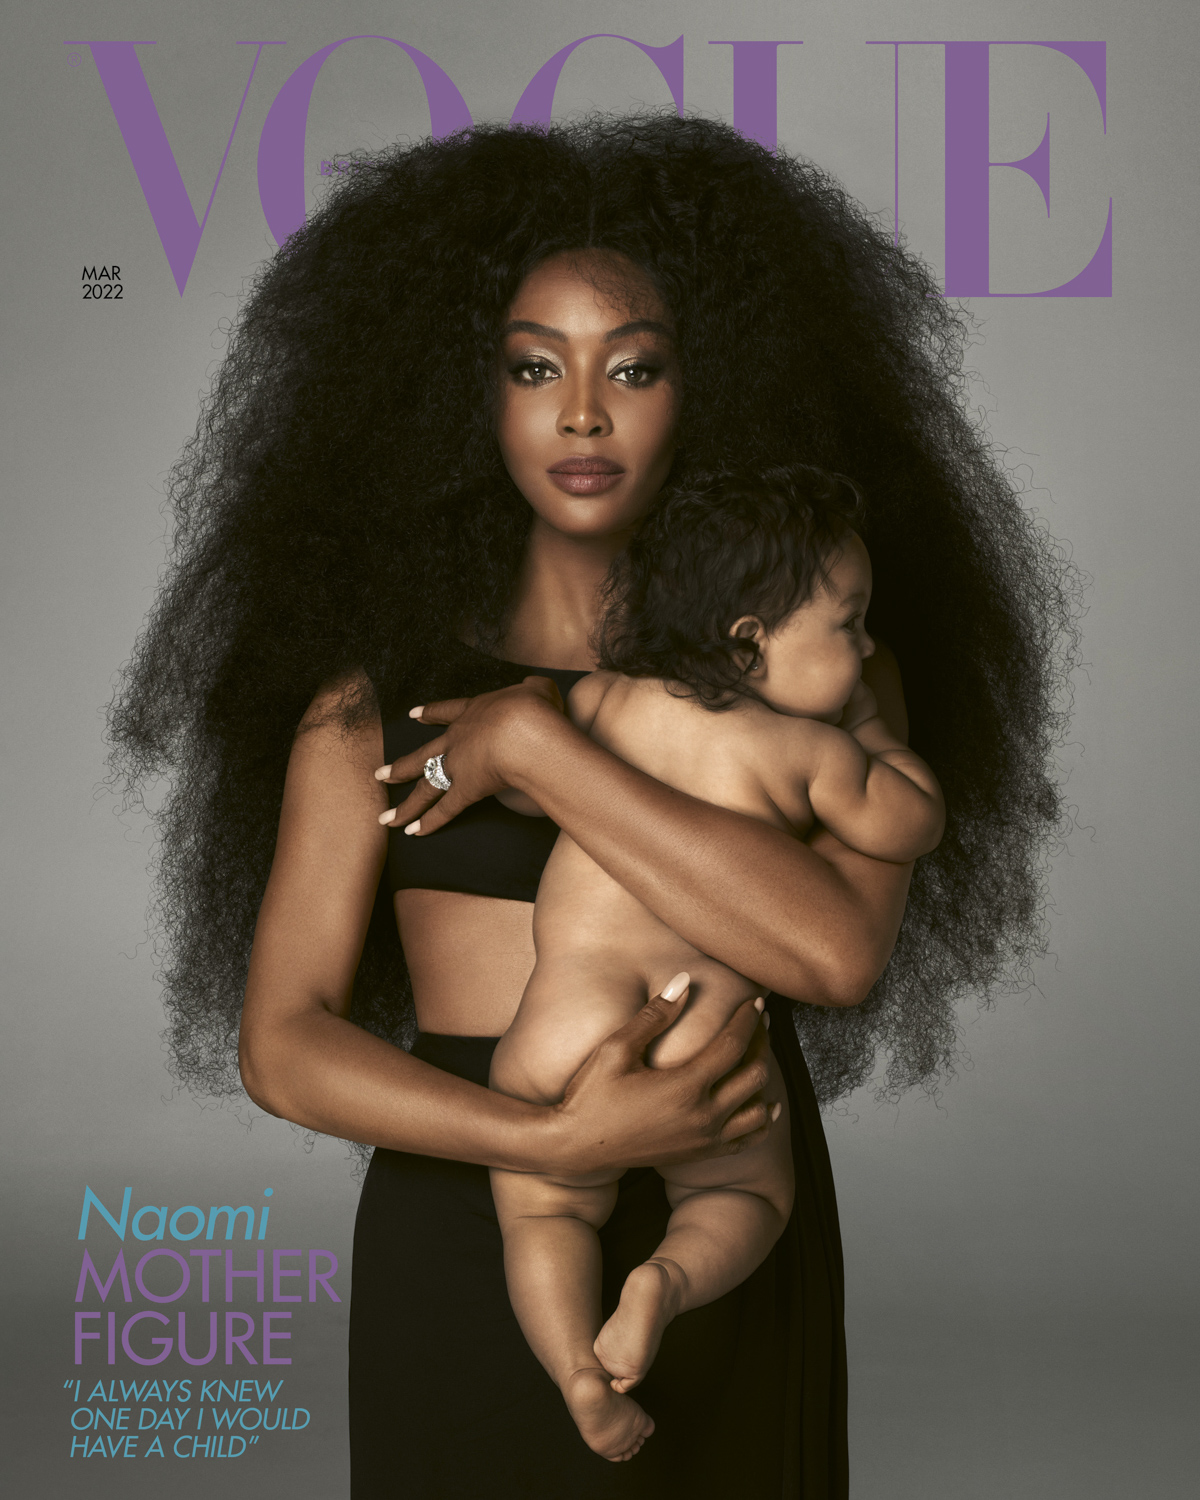 Naomi Campbell on her baby – “she’s my child”